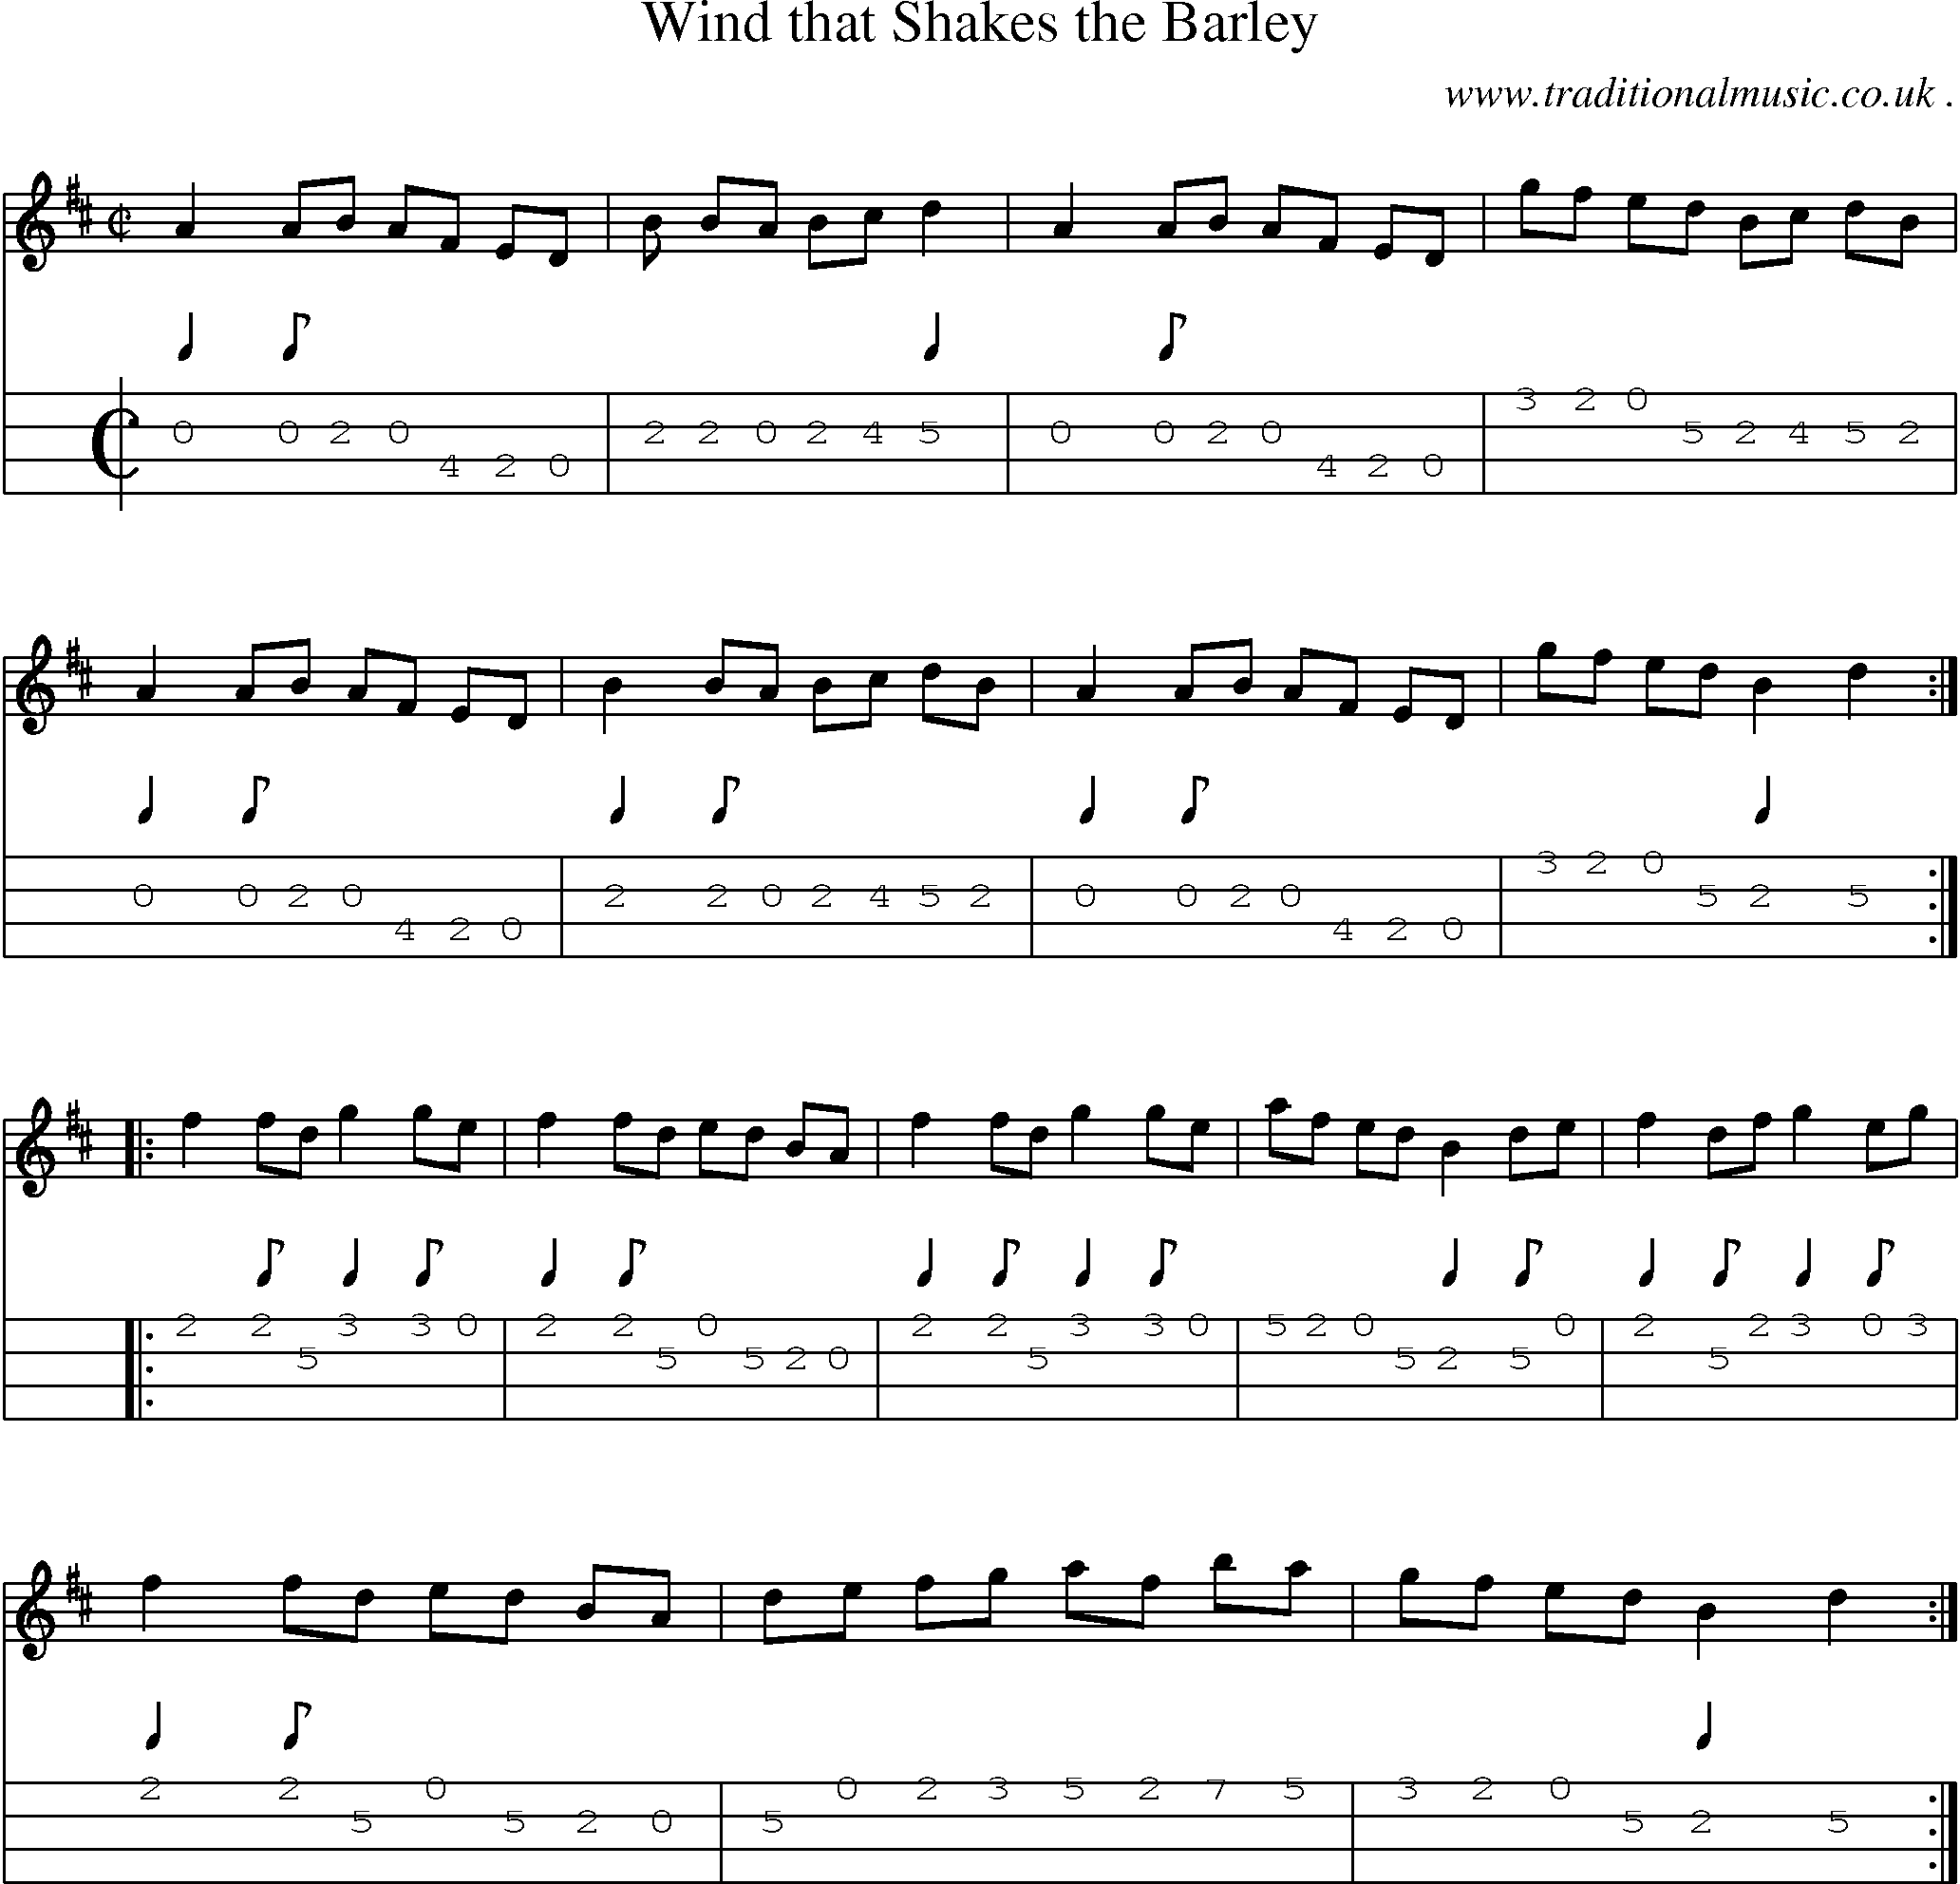 Sheet-music  score, Chords and Mandolin Tabs for Wind That Shakes The Barley